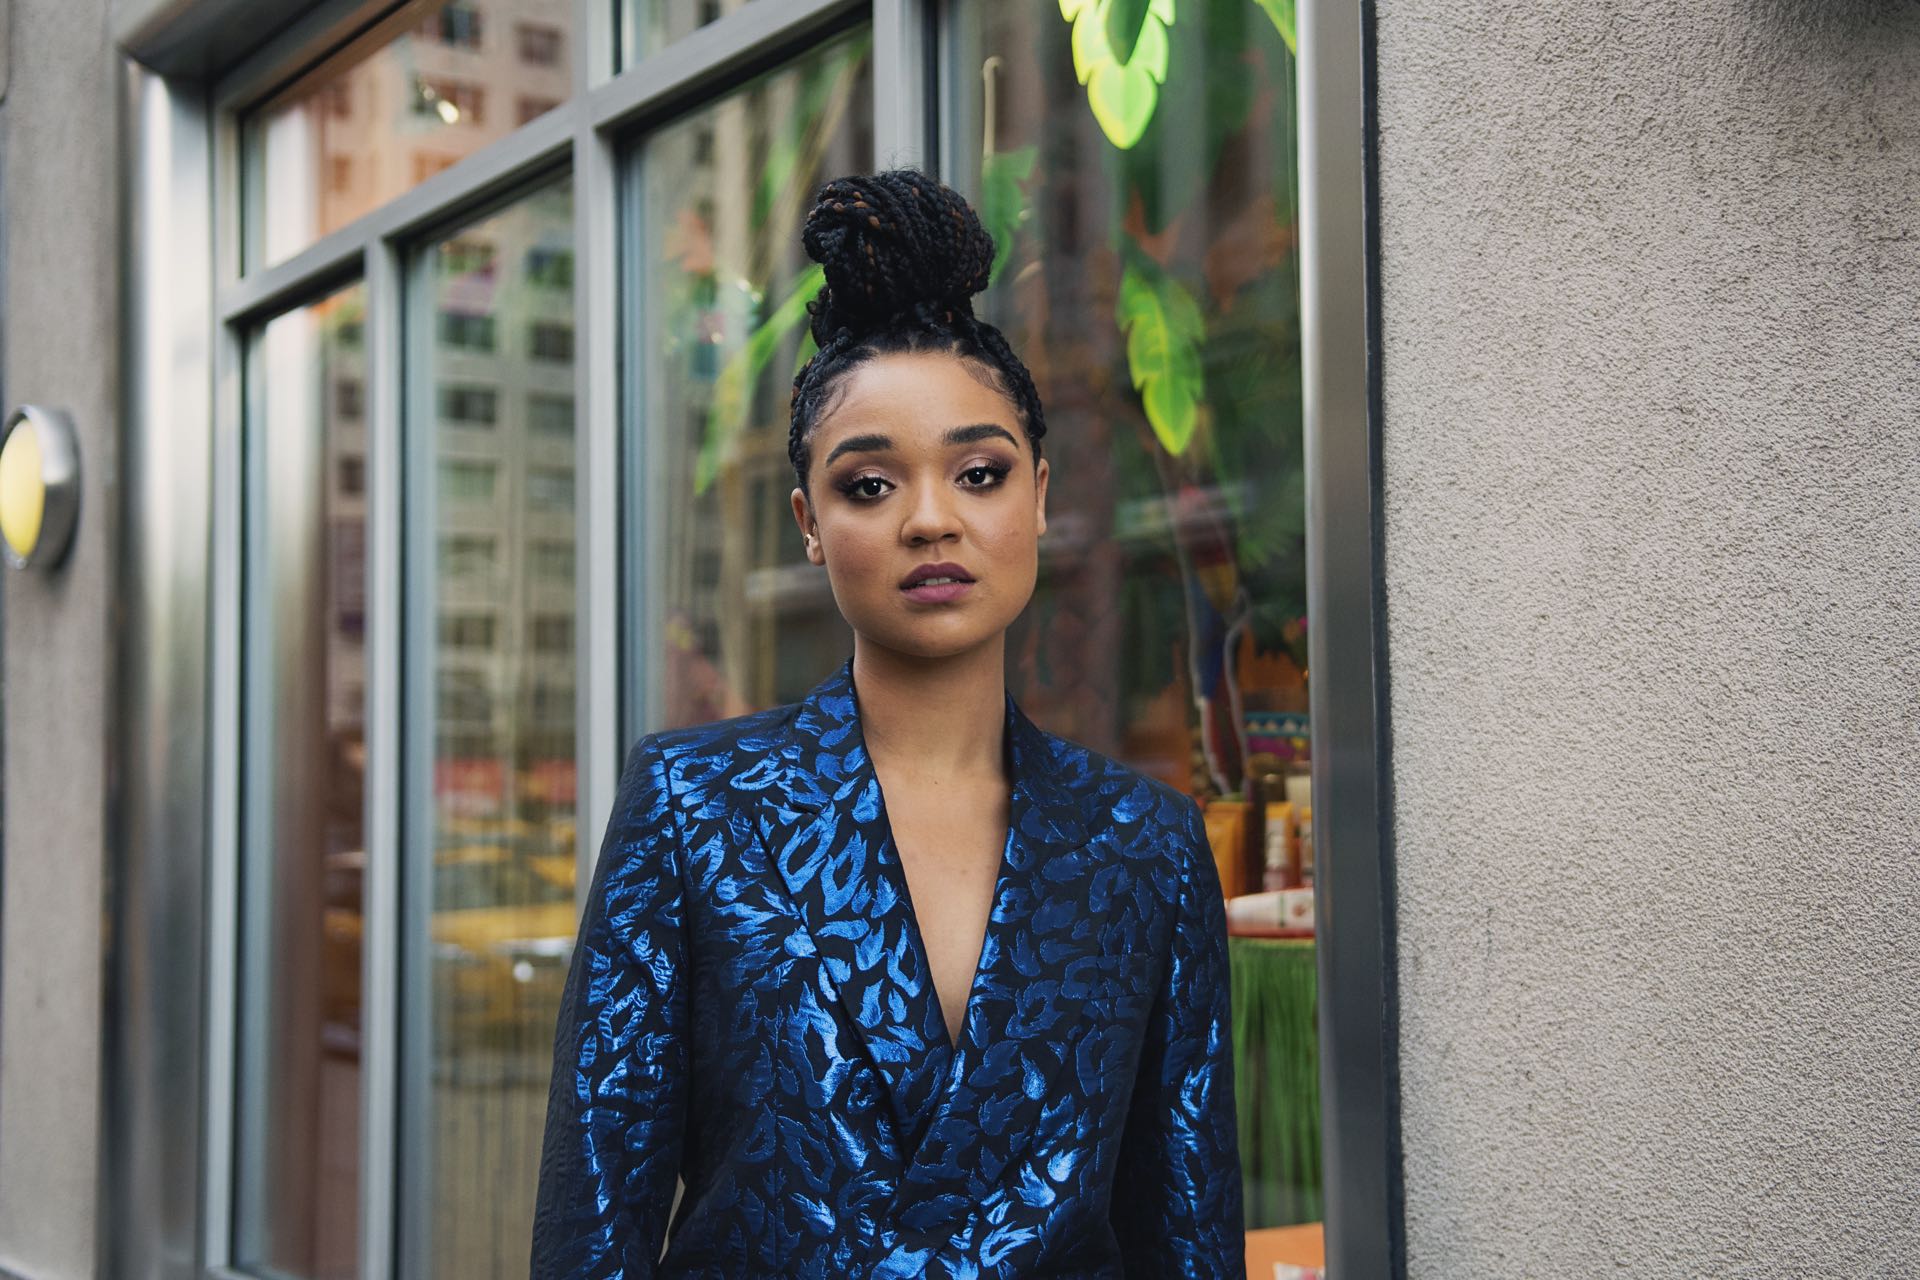 49 Hot Pictures Of Aisha Dee Which Will Make You Fantasize Her | Best Of Comic Books